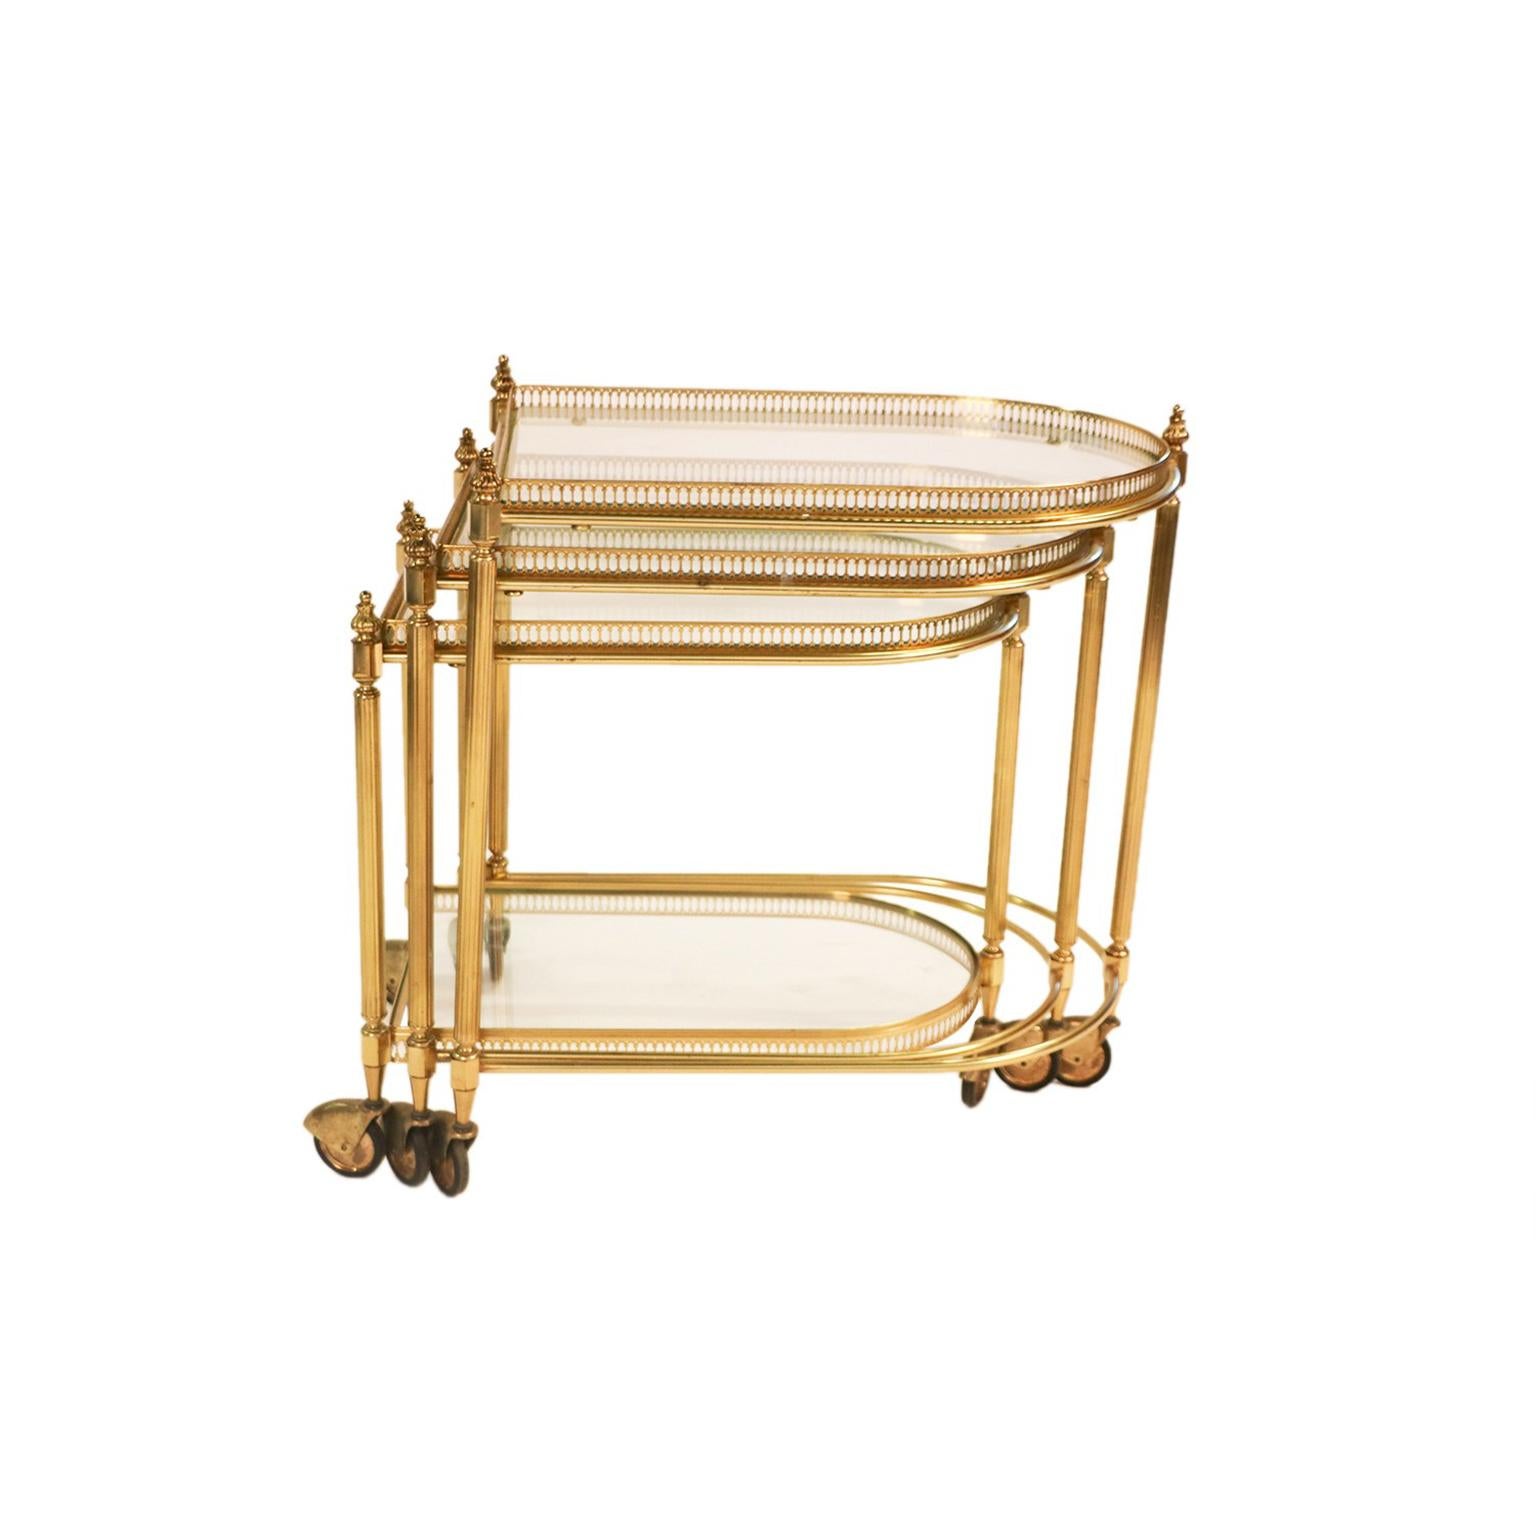 Set of three neoclassical, Hollywood Regency brass, and glass nesting tables on casters, exceptionally well crafted, circa 1940s. Featuring gallery trays with glass insert, resting on polished brass frames, accented with brass finials giving the set